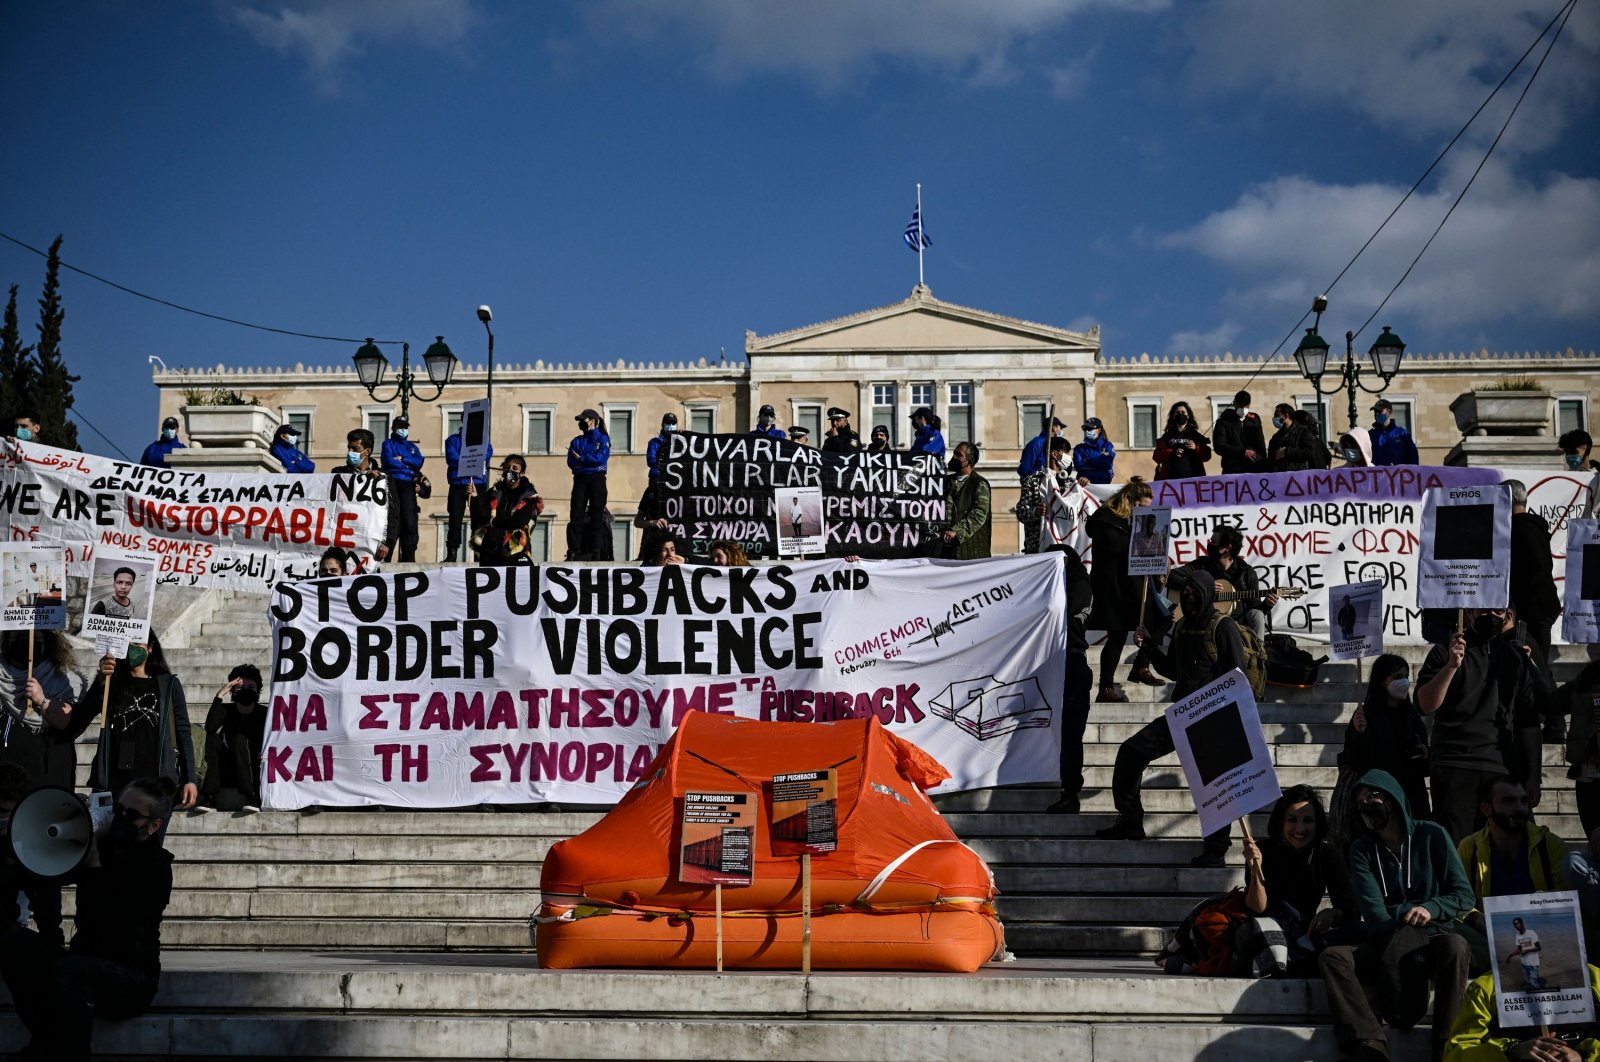 European Ombudsperson opens inquiry into the Commission’s administration of EU funding used in Greece’s illegal expulsion of migrants